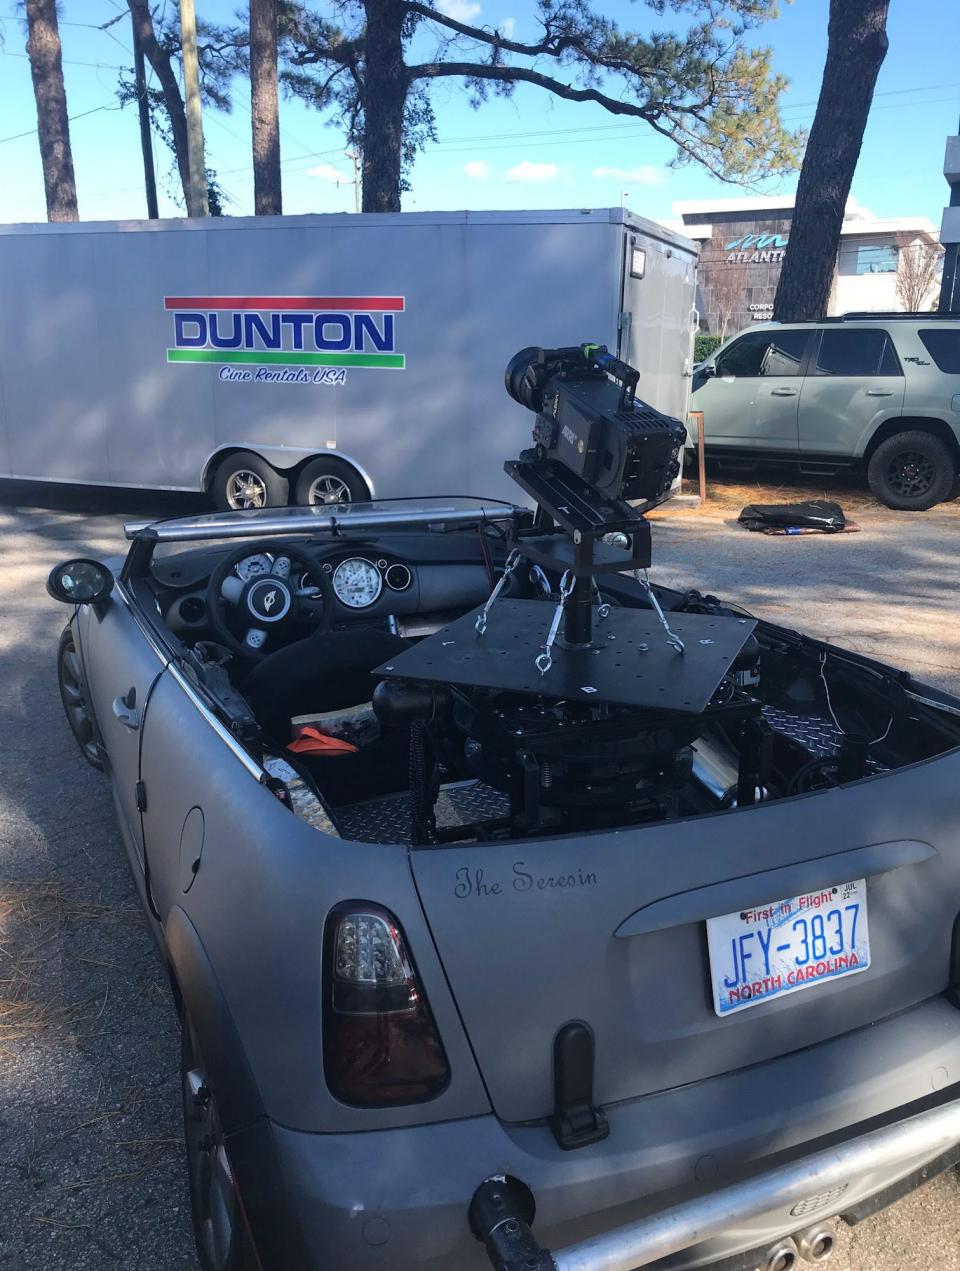 A car at DuntonCine Studio in Wilmington used for capturing footage used in driving scenes for movies and TV shows.